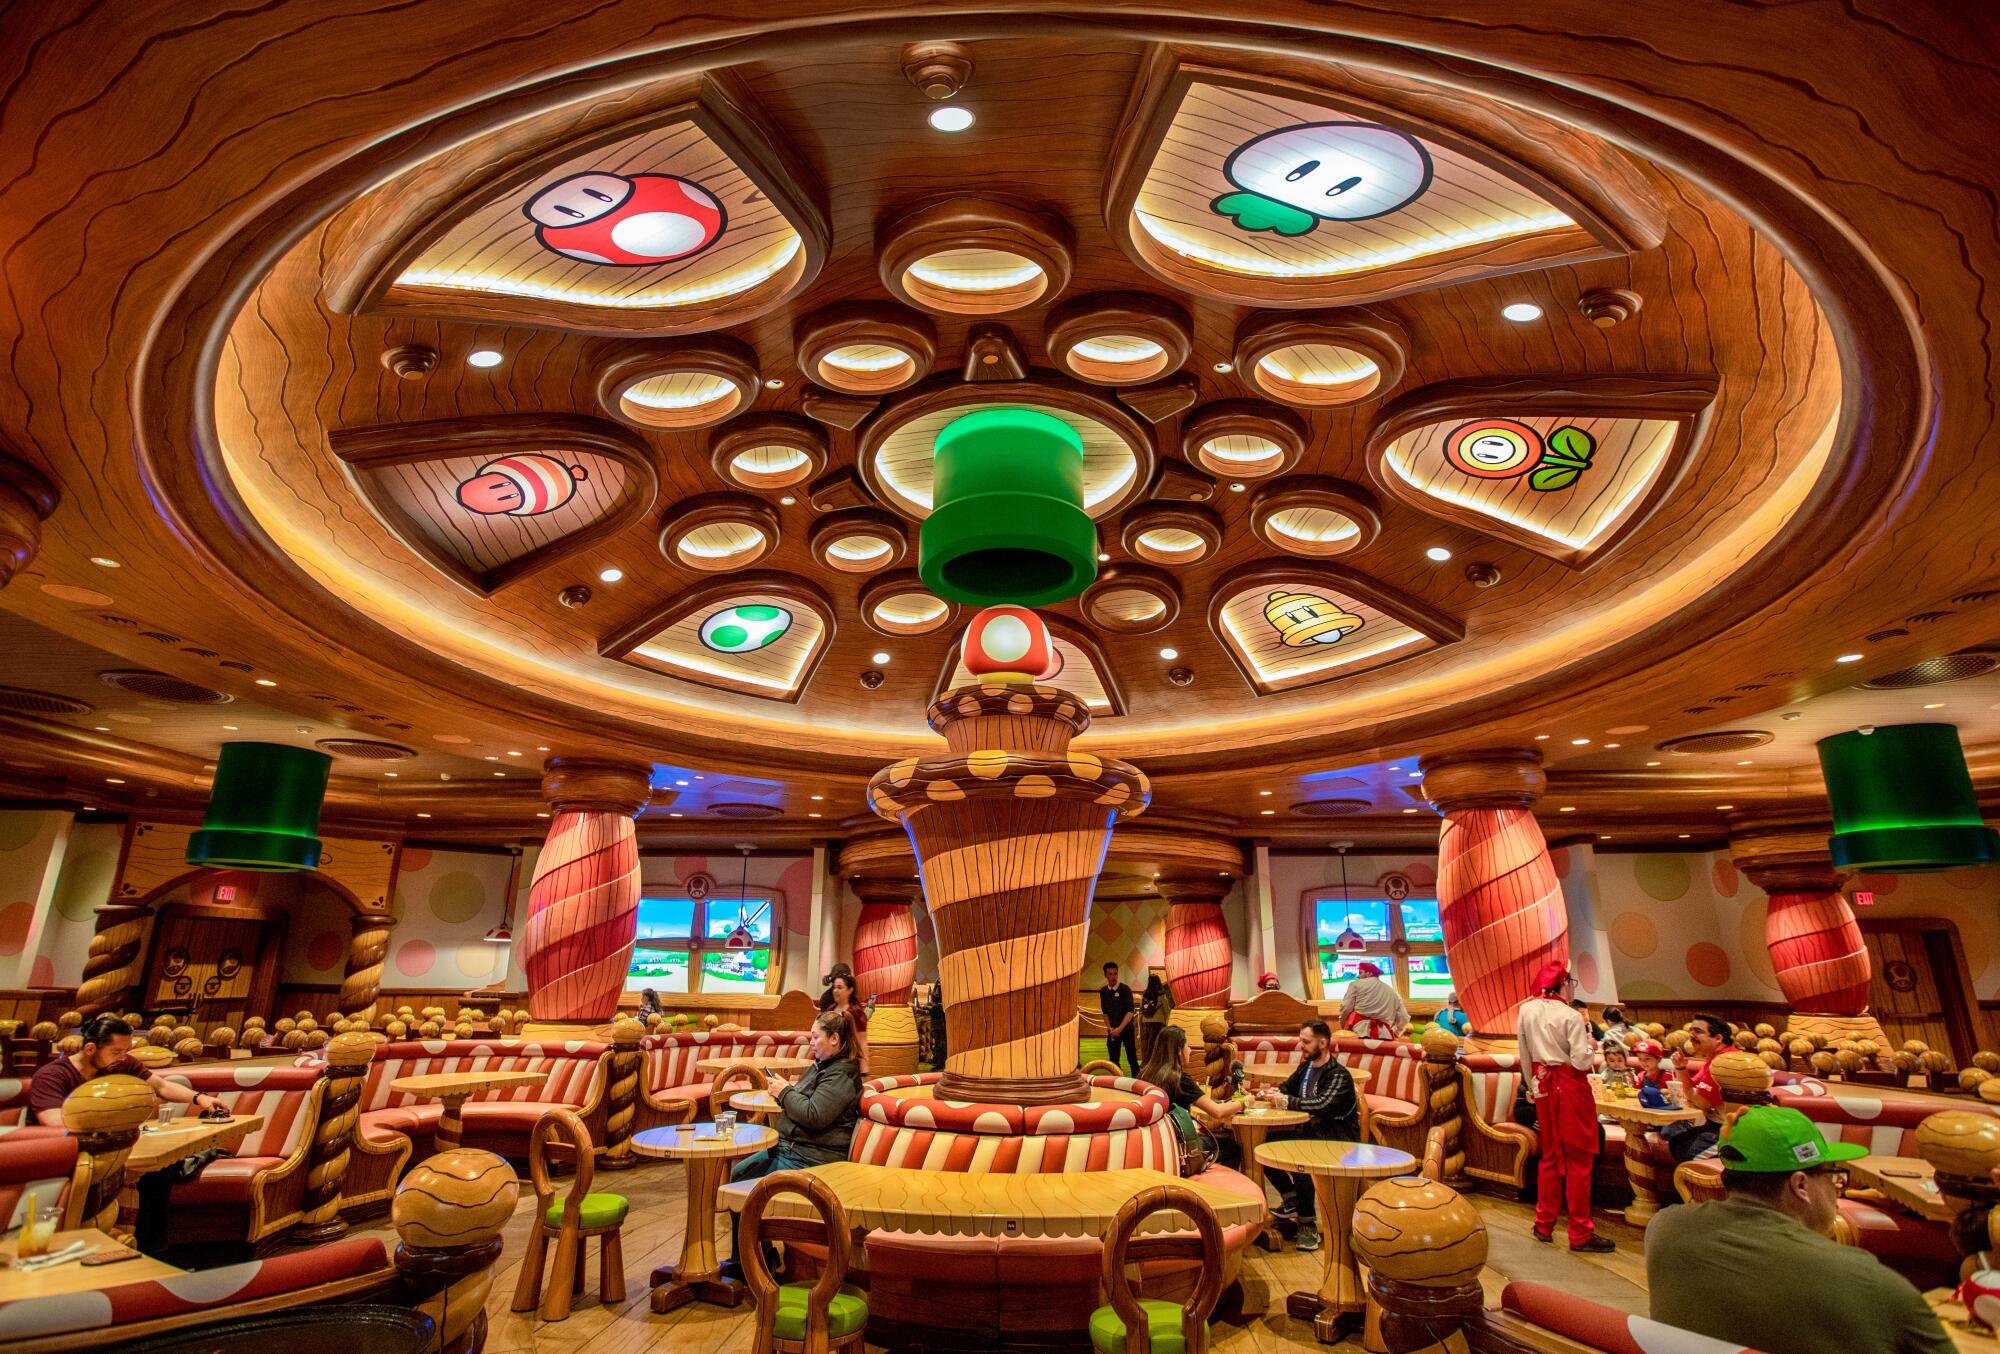 Inside Toadstool Cafe, the new themed restaurant within Nintendo World at Universal Studios Hollywood.